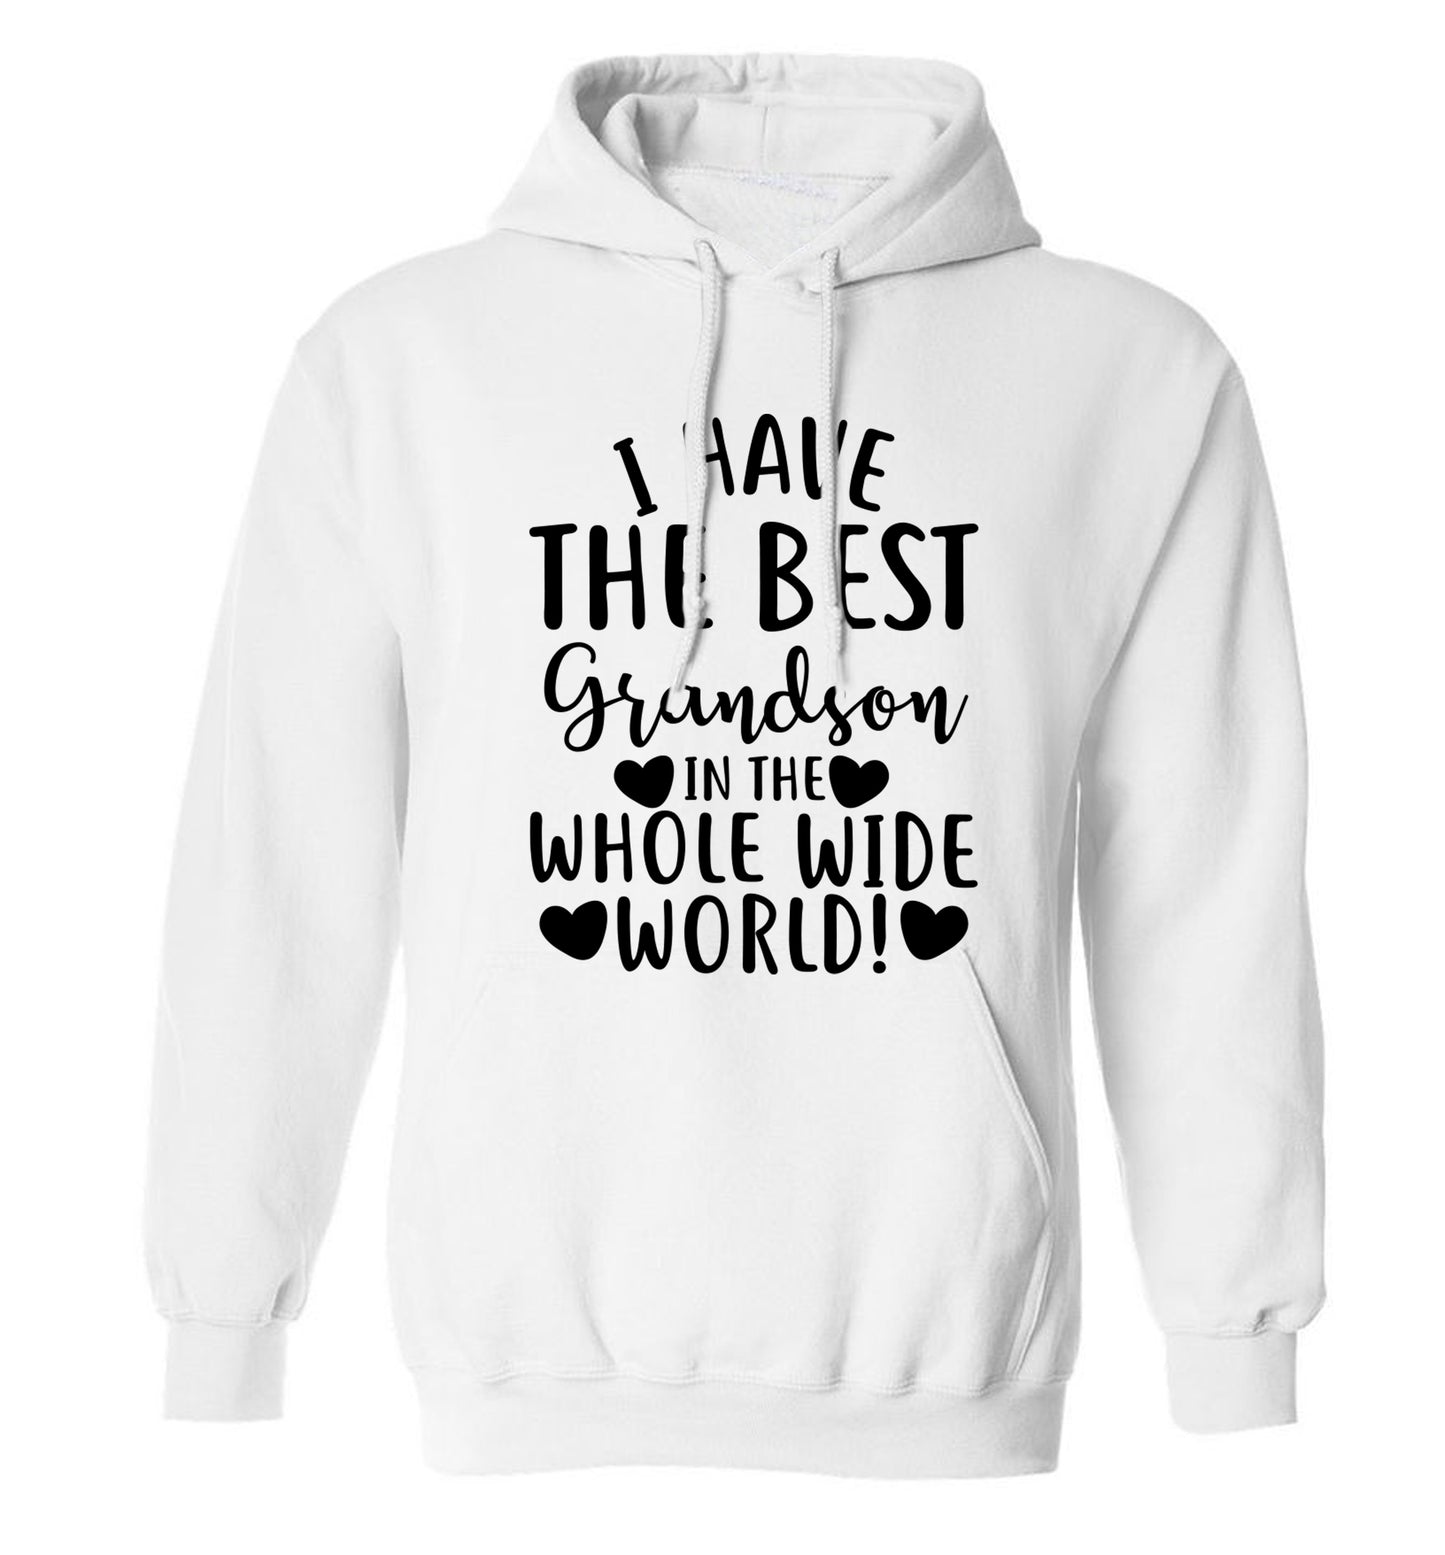 I have the best grandson in the whole wide world! adults unisex white hoodie 2XL